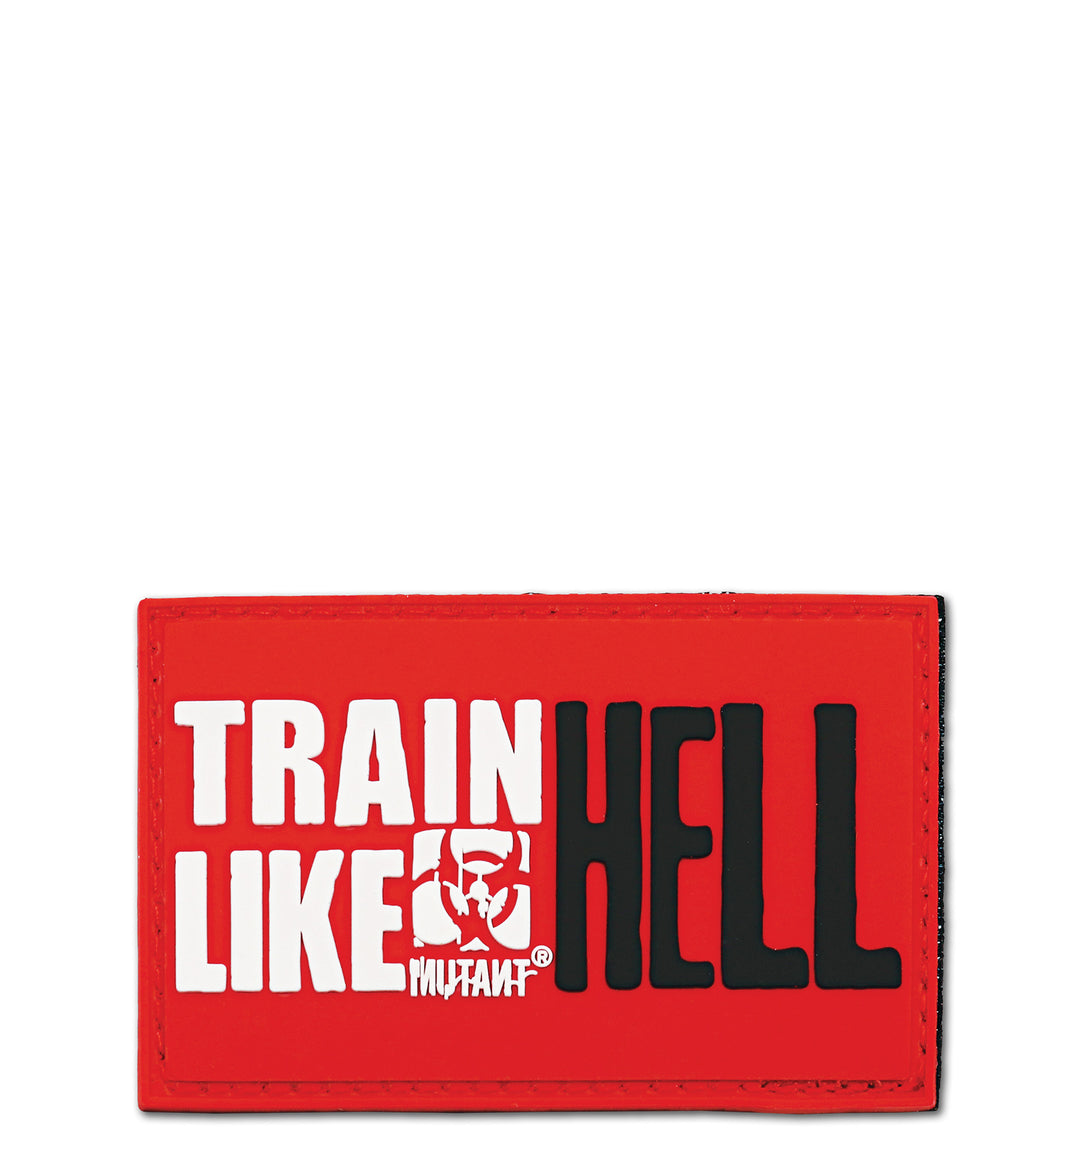 TRAIN LIKE HELL Velcro Patch Black/Red 8x5cm